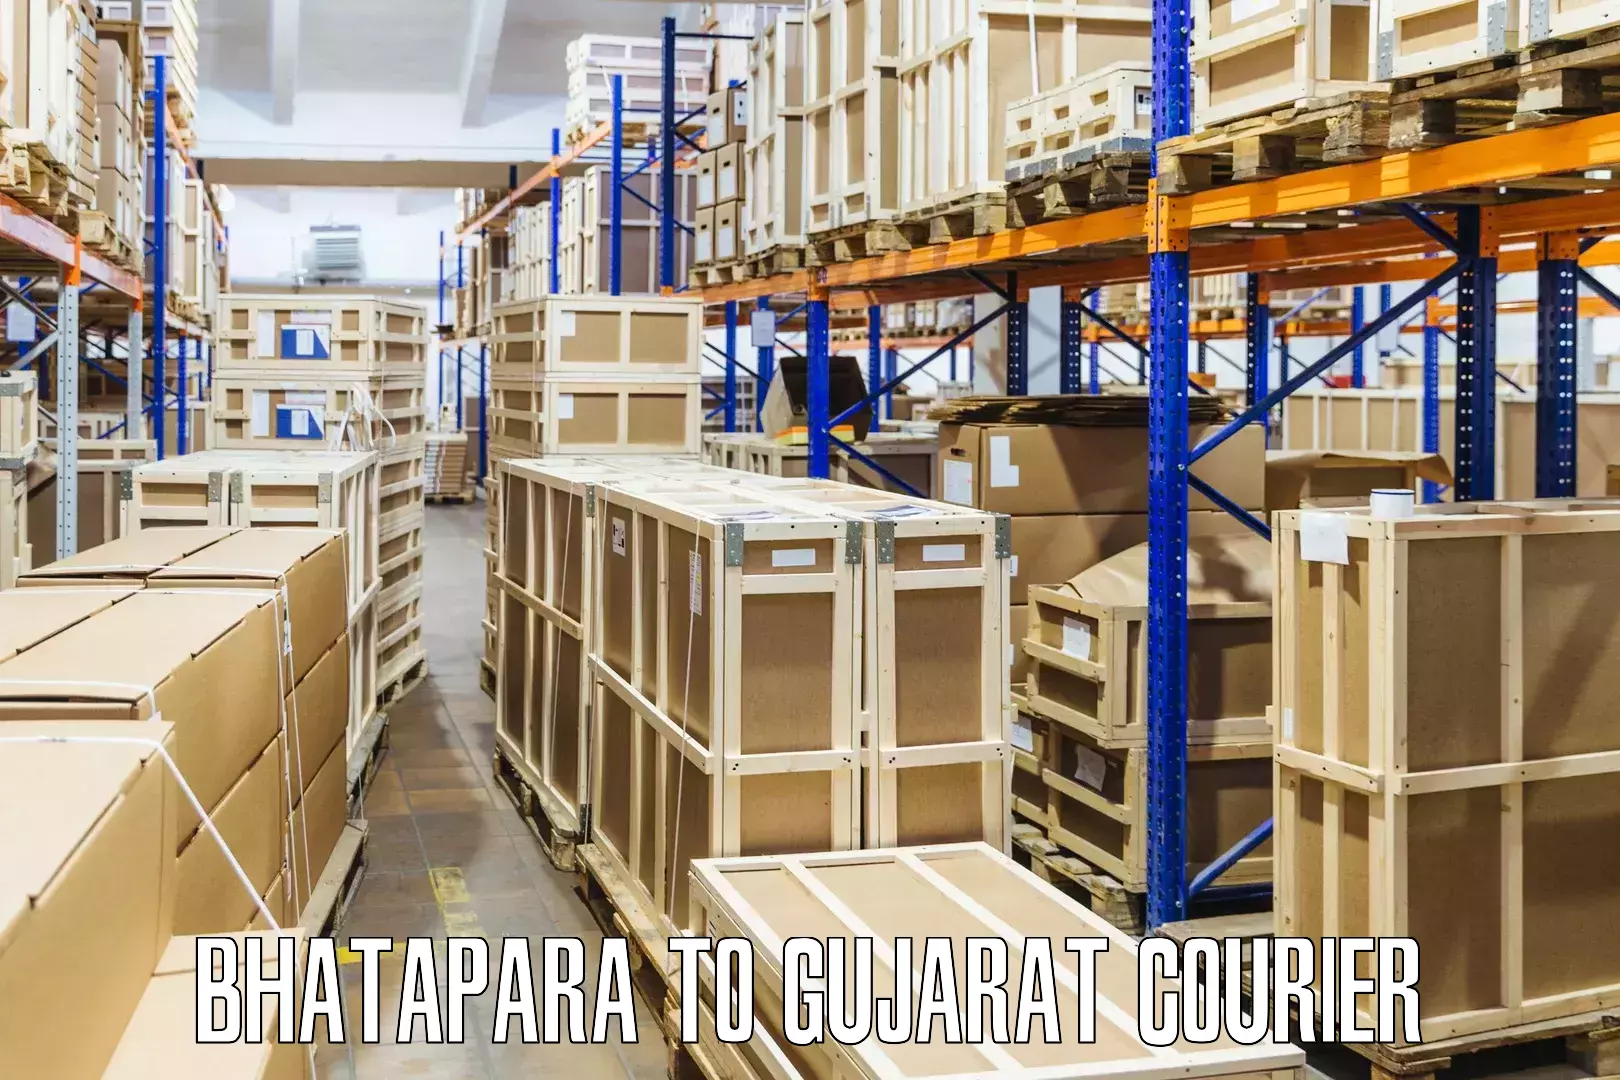 Reliable parcel services Bhatapara to Hansot